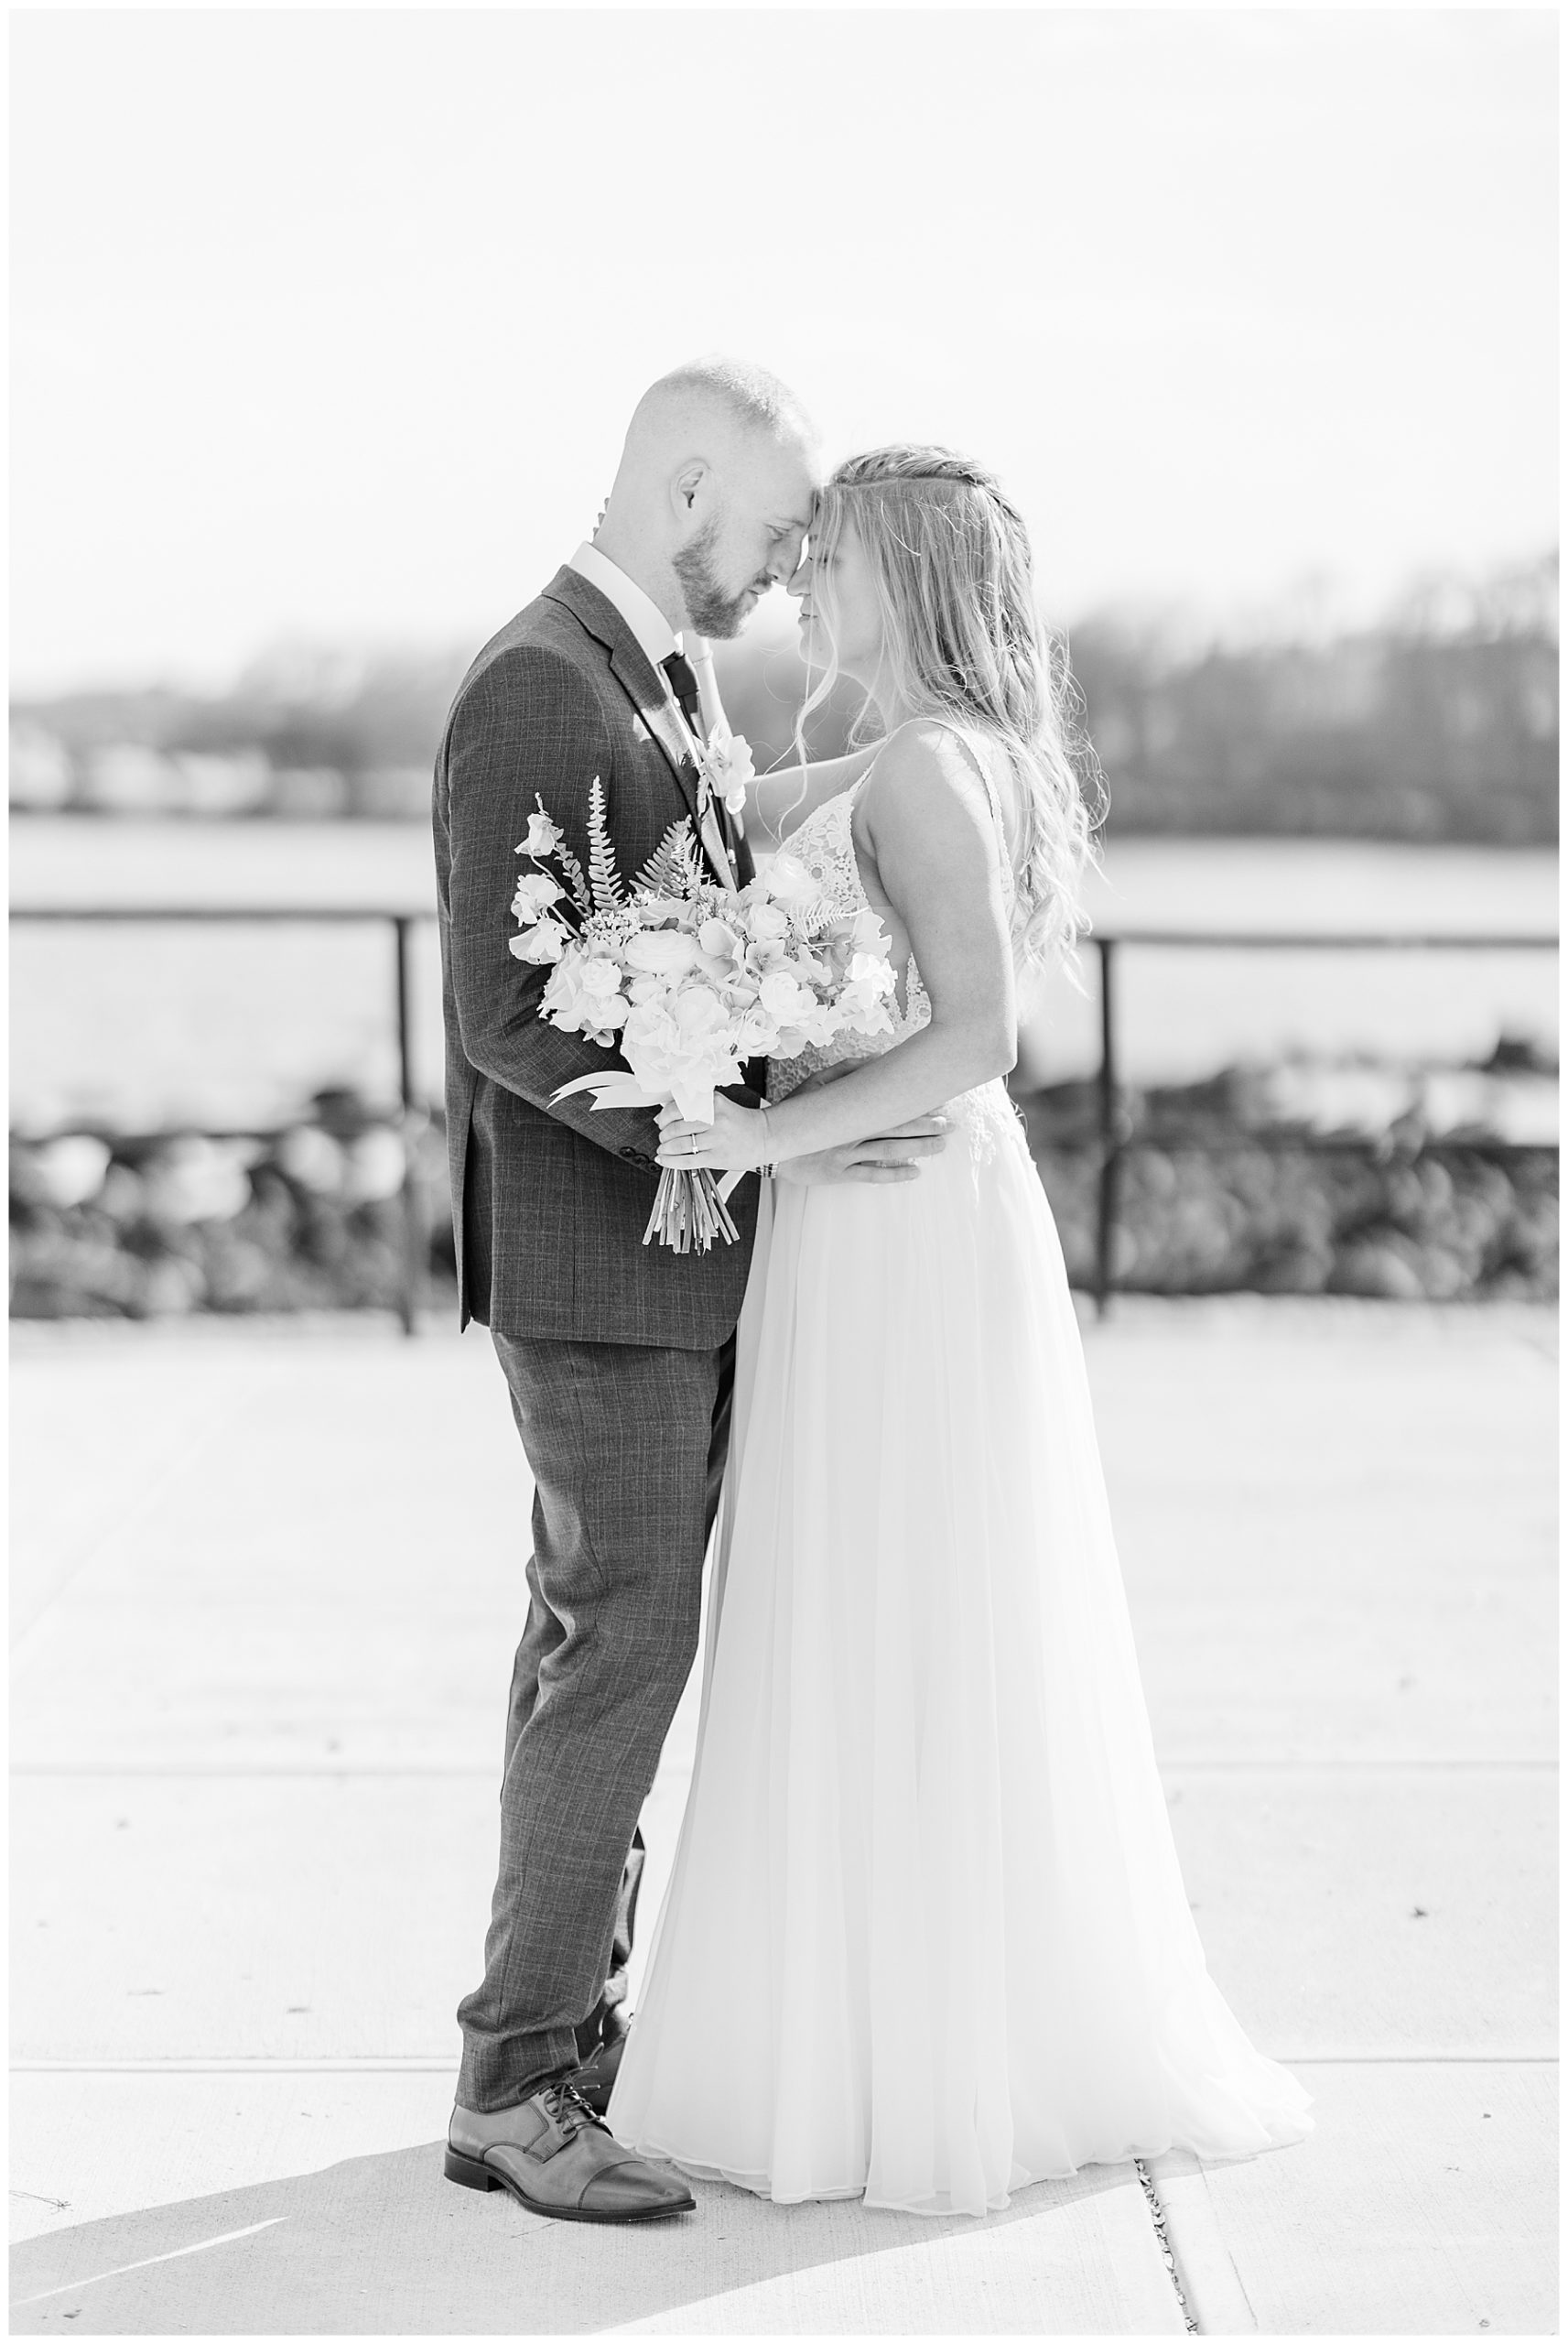 Bride + Groom share intimate moment Beauport Hotel Gloucester Wedding ceremony photographed by Stephanie Berenson